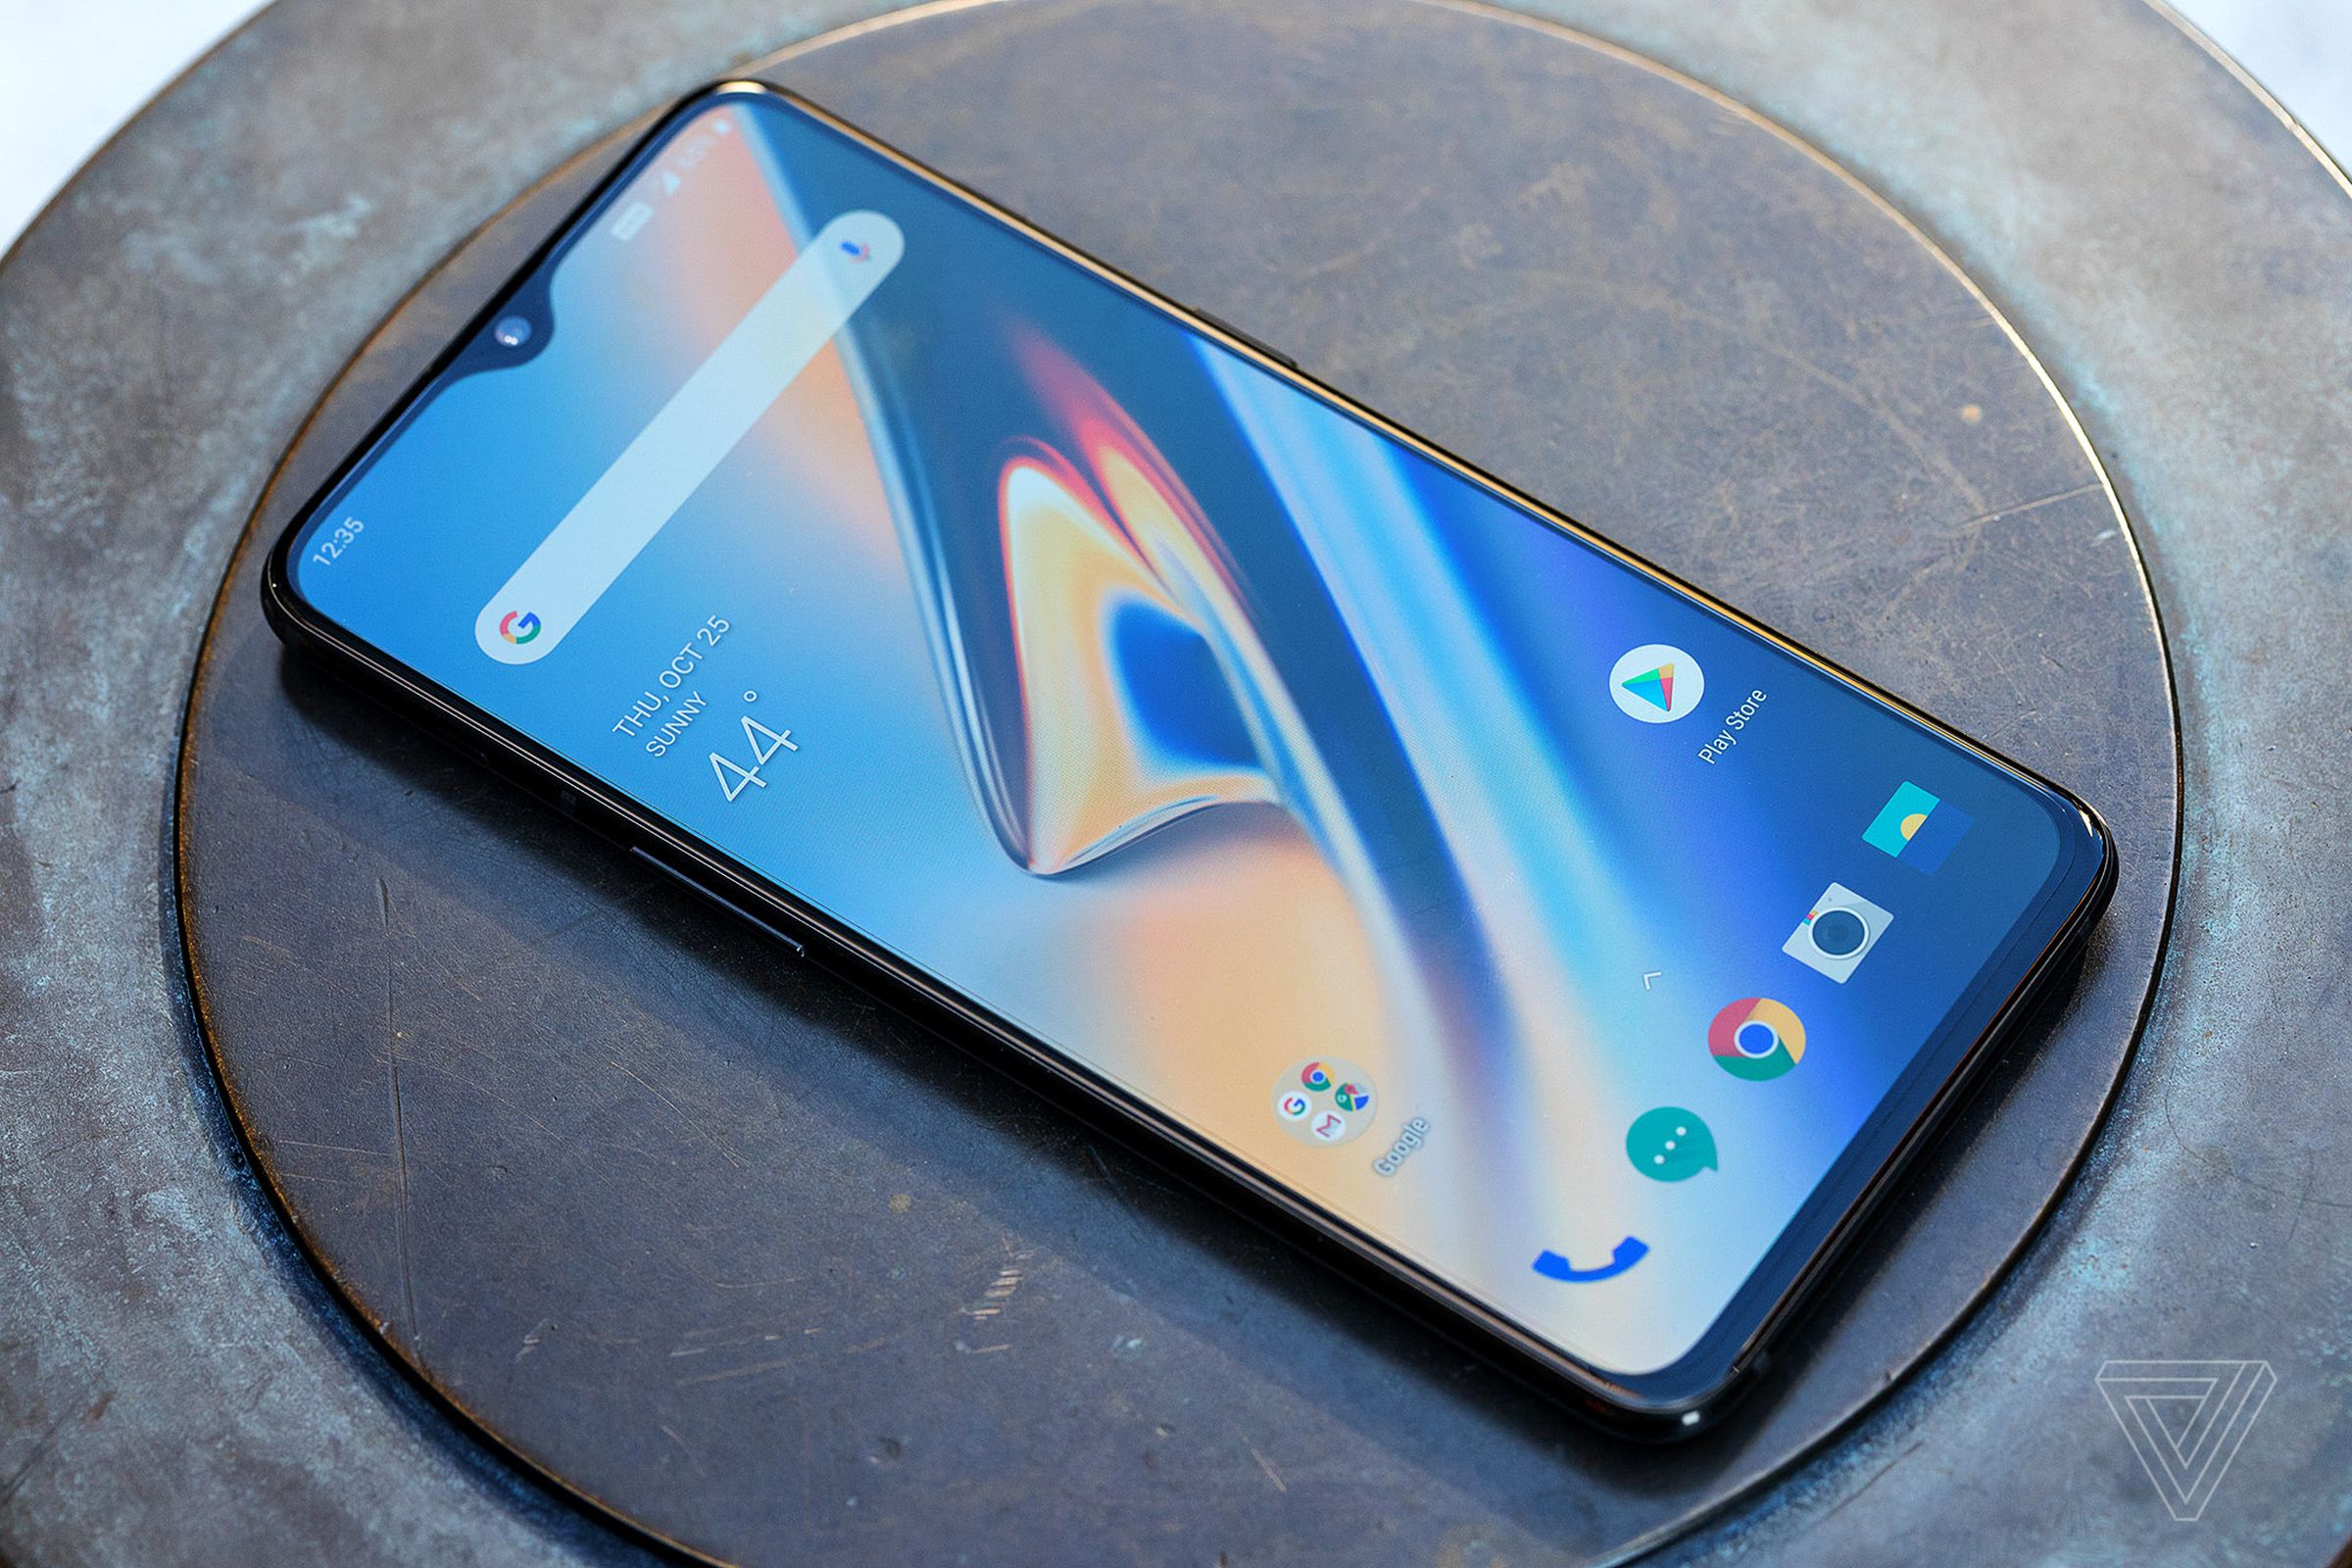 The OnePlus 6T is among the phones with Dirac audio technologies built in.